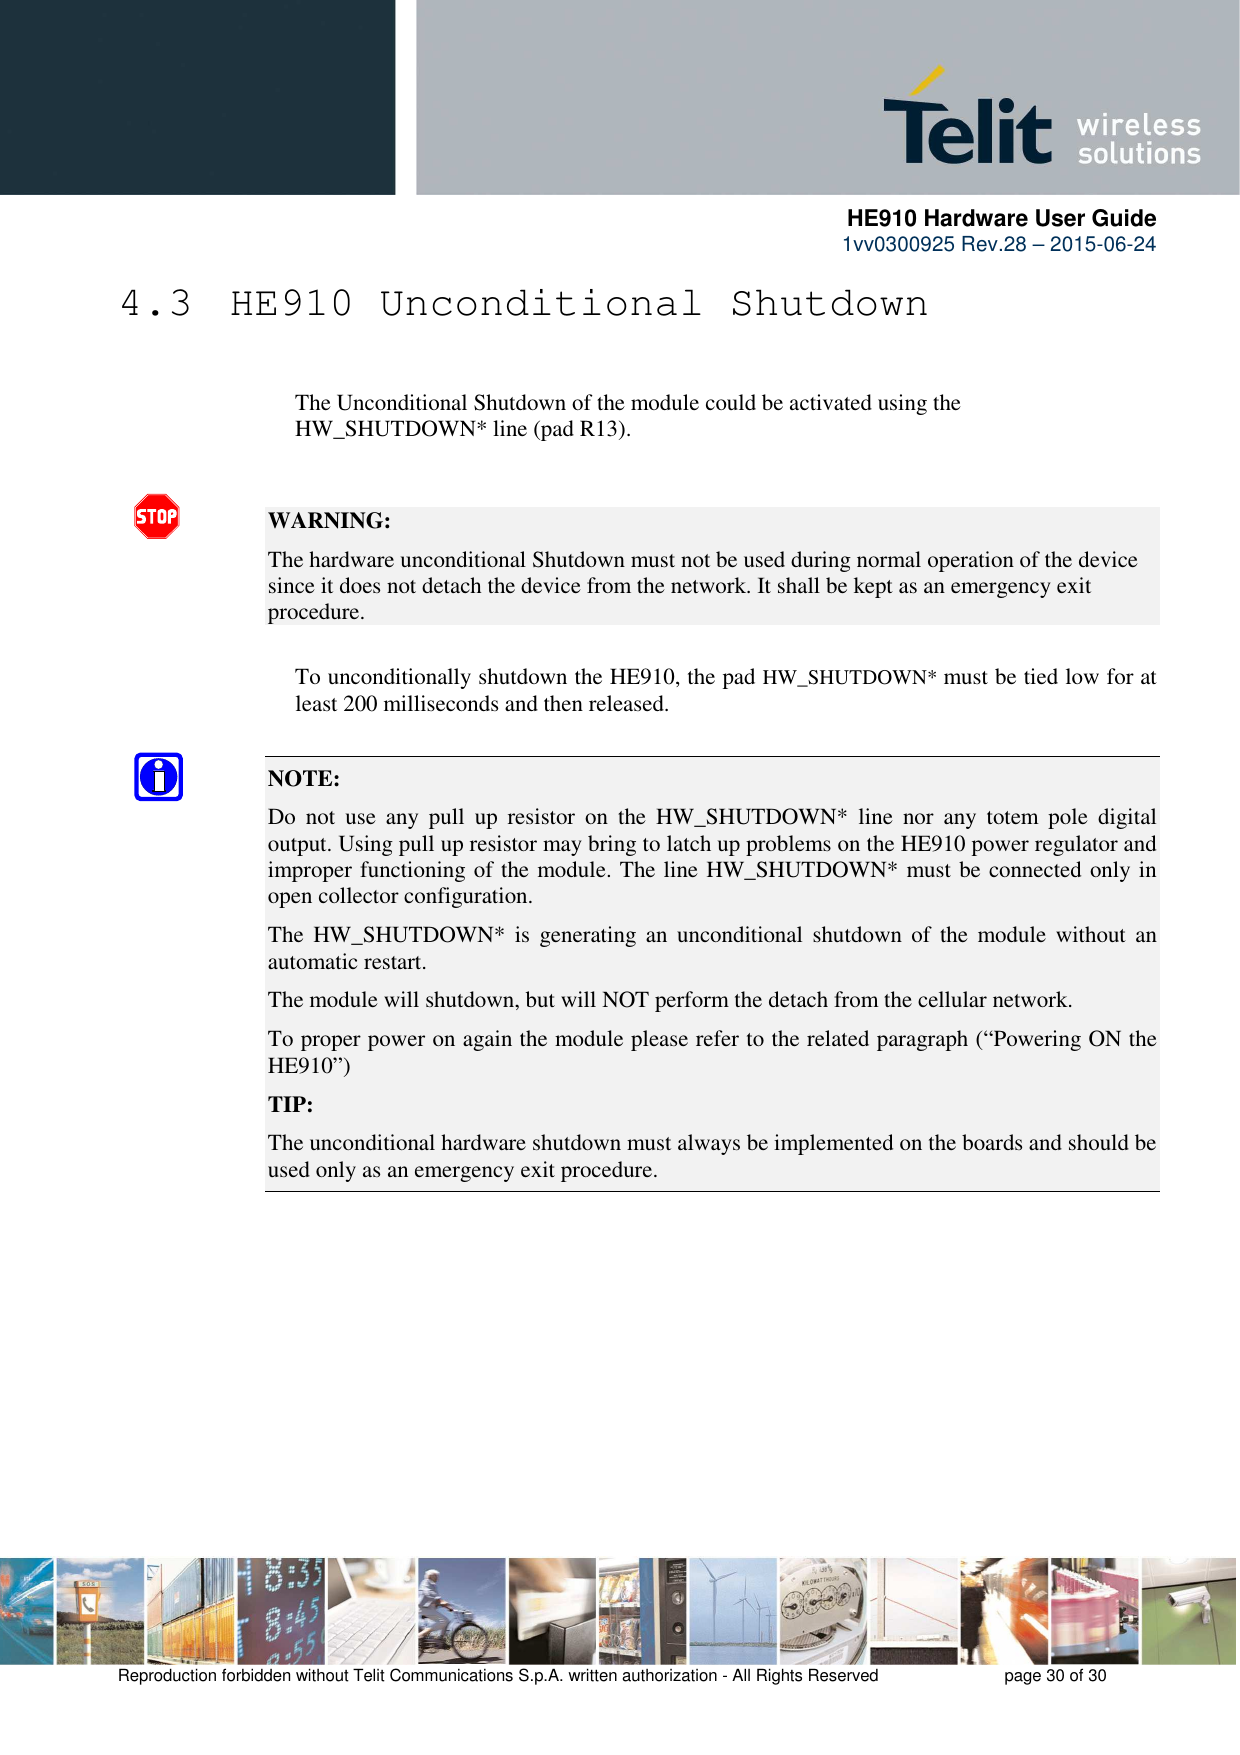      HE910 Hardware User Guide 1vv0300925 Rev.28 – 2015-06-24    Reproduction forbidden without Telit Communications S.p.A. written authorization - All Rights Reserved    page 30 of 30  4.3  HE910 Unconditional Shutdown      The Unconditional Shutdown of the module could be activated using the        HW_SHUTDOWN* line (pad R13).   WARNING: The hardware unconditional Shutdown must not be used during normal operation of the device since it does not detach the device from the network. It shall be kept as an emergency exit procedure.      To unconditionally shutdown the HE910, the pad HW_SHUTDOWN* must be tied low for at     least 200 milliseconds and then released.  NOTE:  Do  not  use  any  pull  up  resistor  on  the  HW_SHUTDOWN*  line  nor  any  totem  pole  digital output. Using pull up resistor may bring to latch up problems on the HE910 power regulator and improper functioning of the module. The line HW_SHUTDOWN* must be connected only in open collector configuration. The  HW_SHUTDOWN*  is  generating  an  unconditional shutdown  of  the  module  without  an automatic restart. The module will shutdown, but will NOT perform the detach from the cellular network. To proper power on again the module please refer to the related paragraph (“Powering ON the HE910”) TIP: The unconditional hardware shutdown must always be implemented on the boards and should be used only as an emergency exit procedure.       